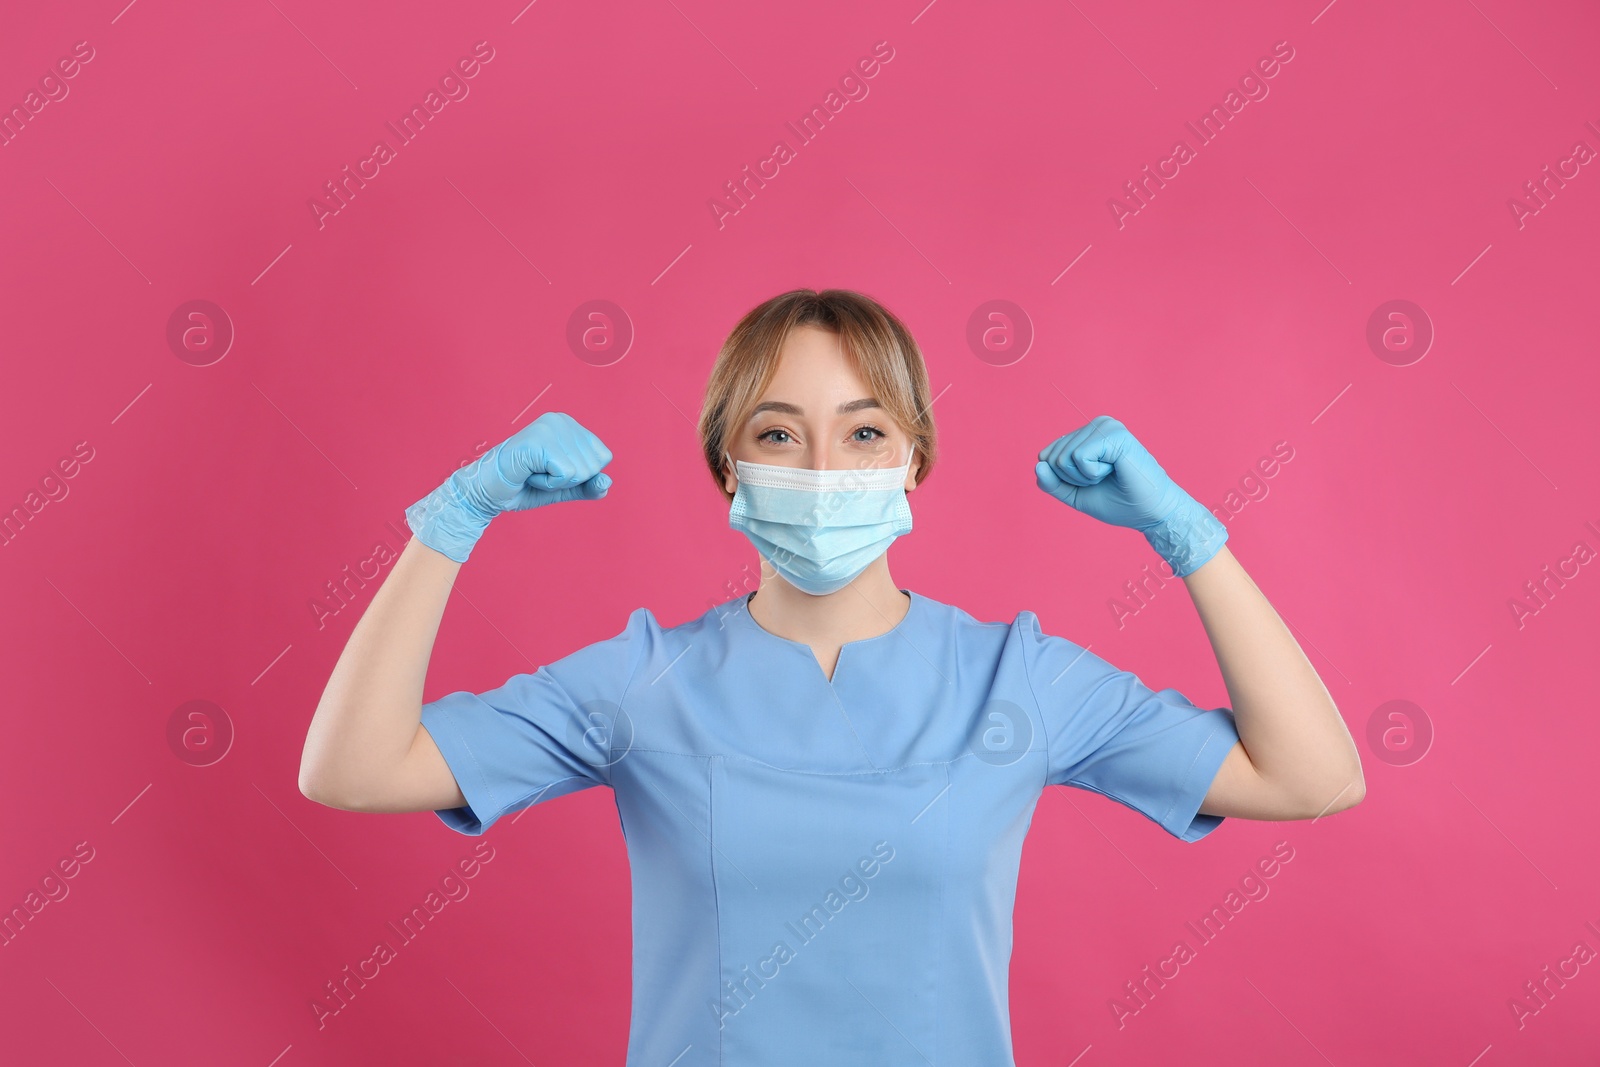 Photo of Doctor with protective mask showing muscles on pink background. Strong immunity concept